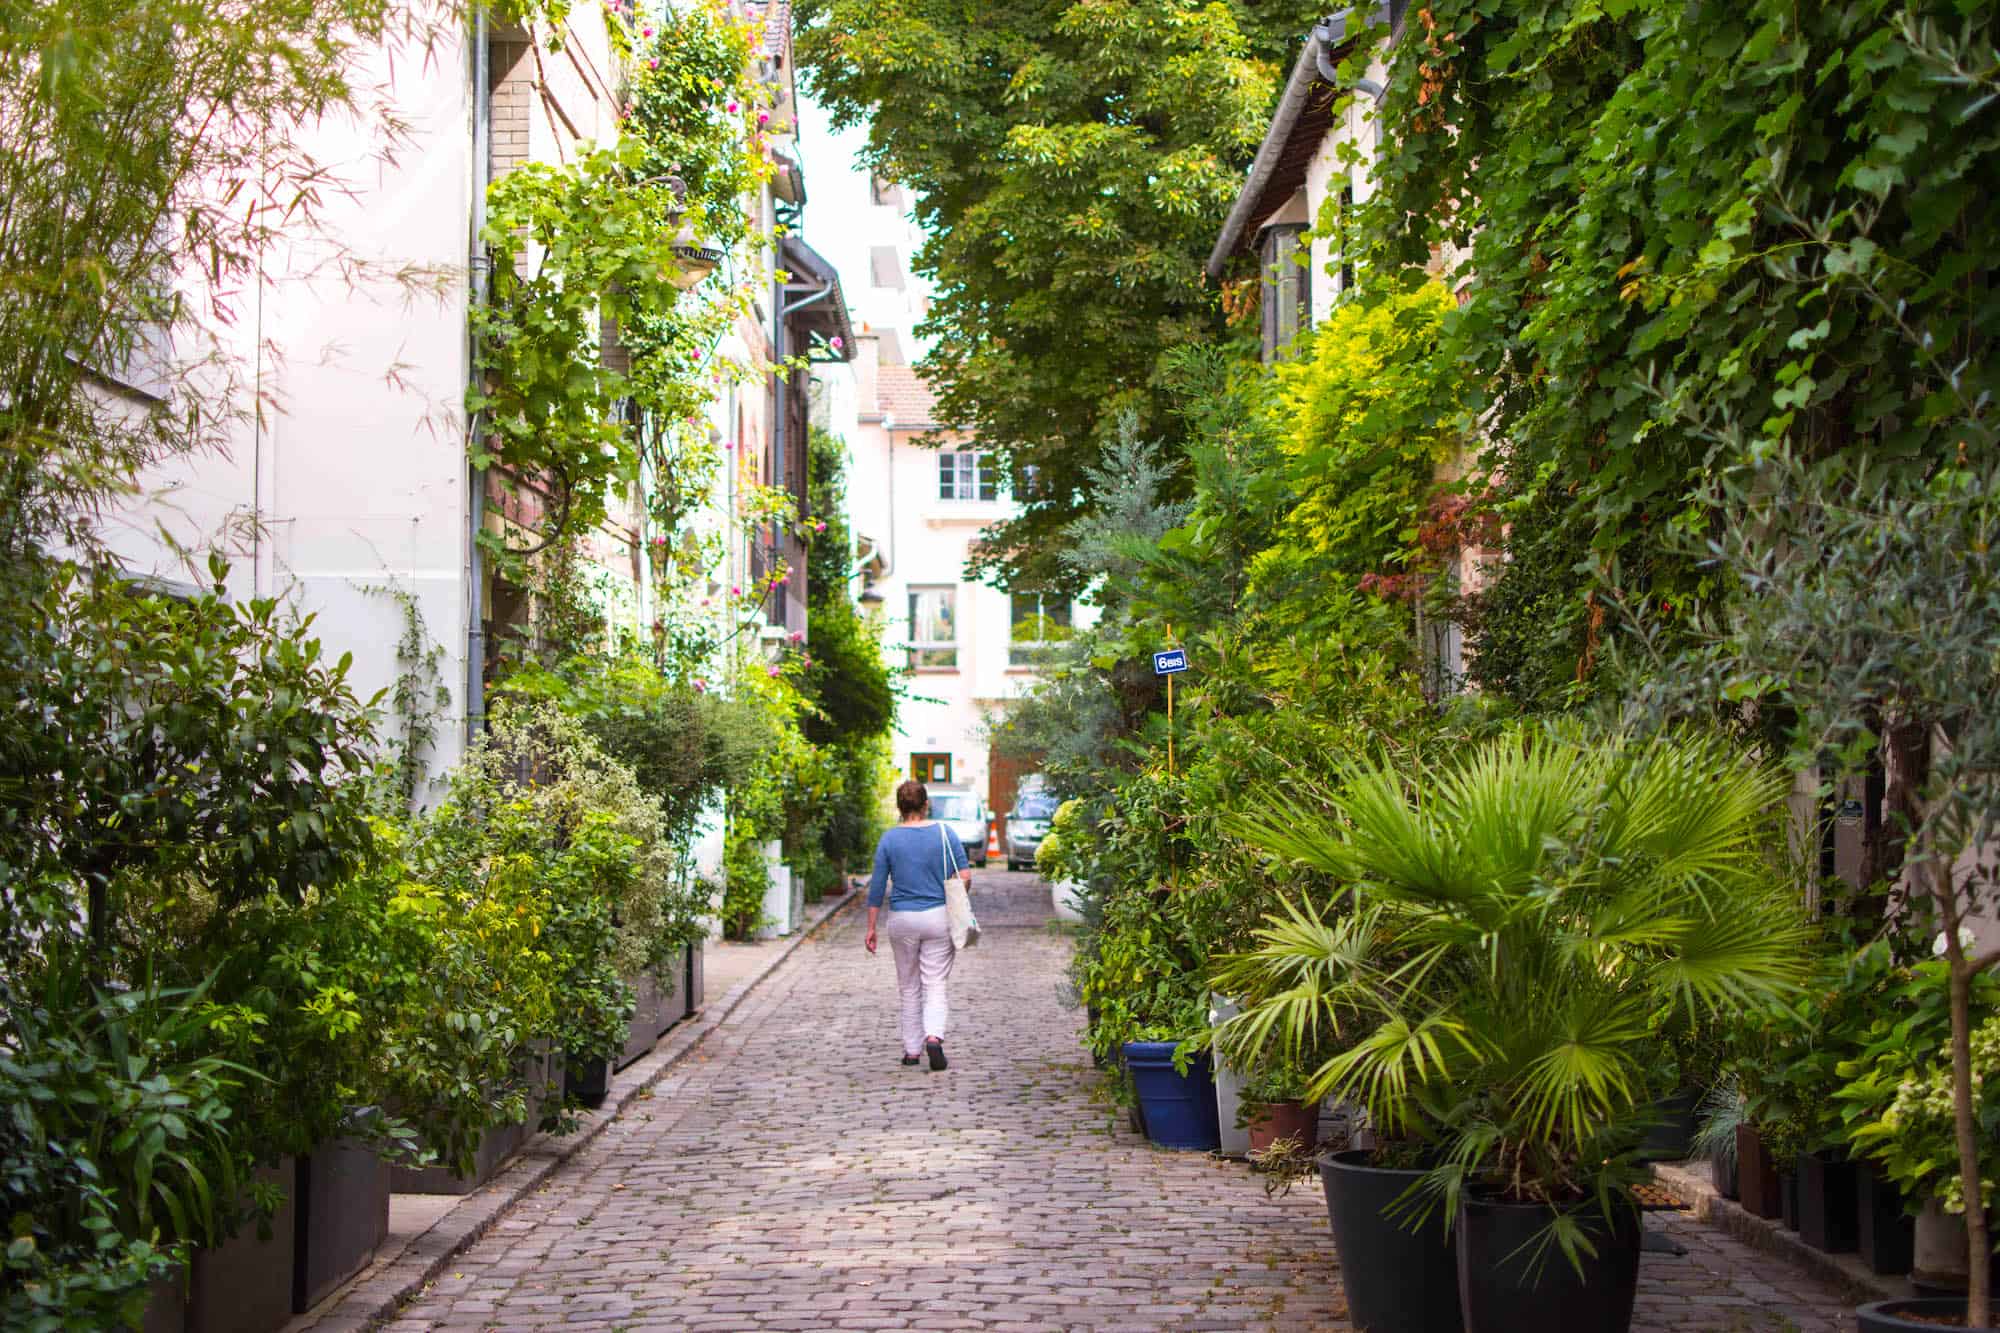 In the Villa Santos-Dumont neighborhood, located in Paris' 15th arrondissement, passerby will find an explosion of greenery on this street, loved by artists. 